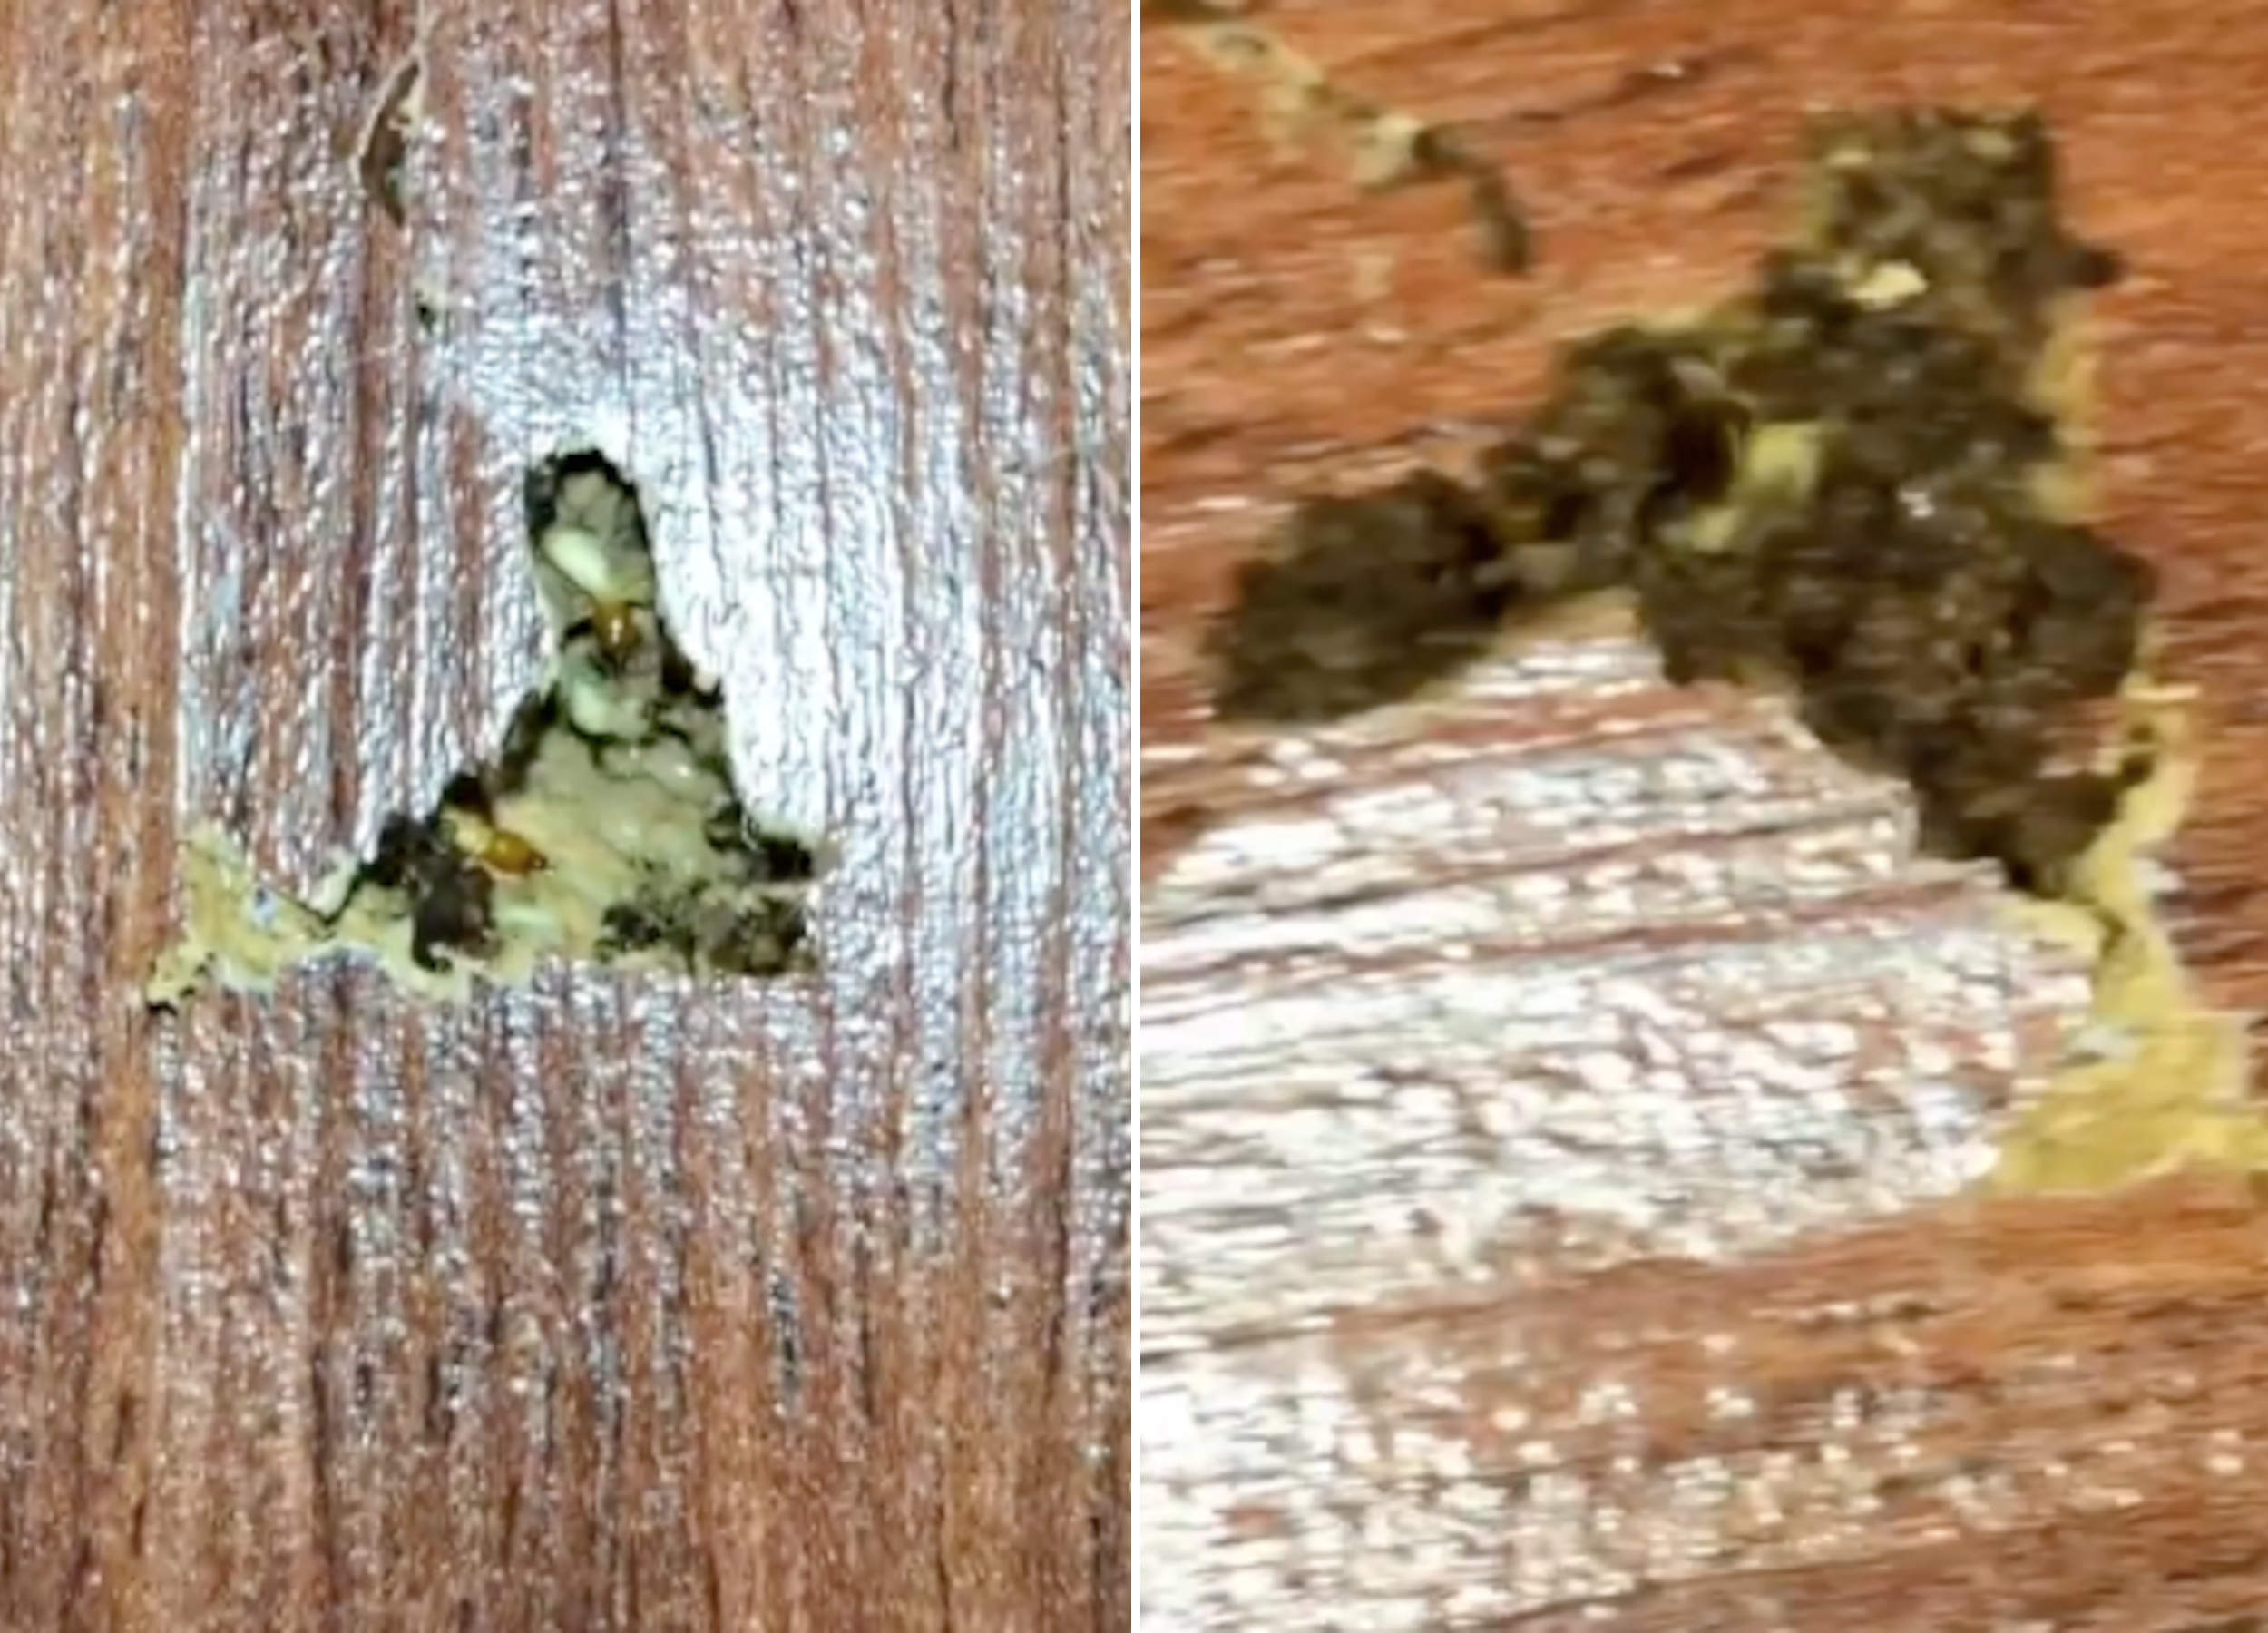 Internet Freaks Out at Termite Infestation Video